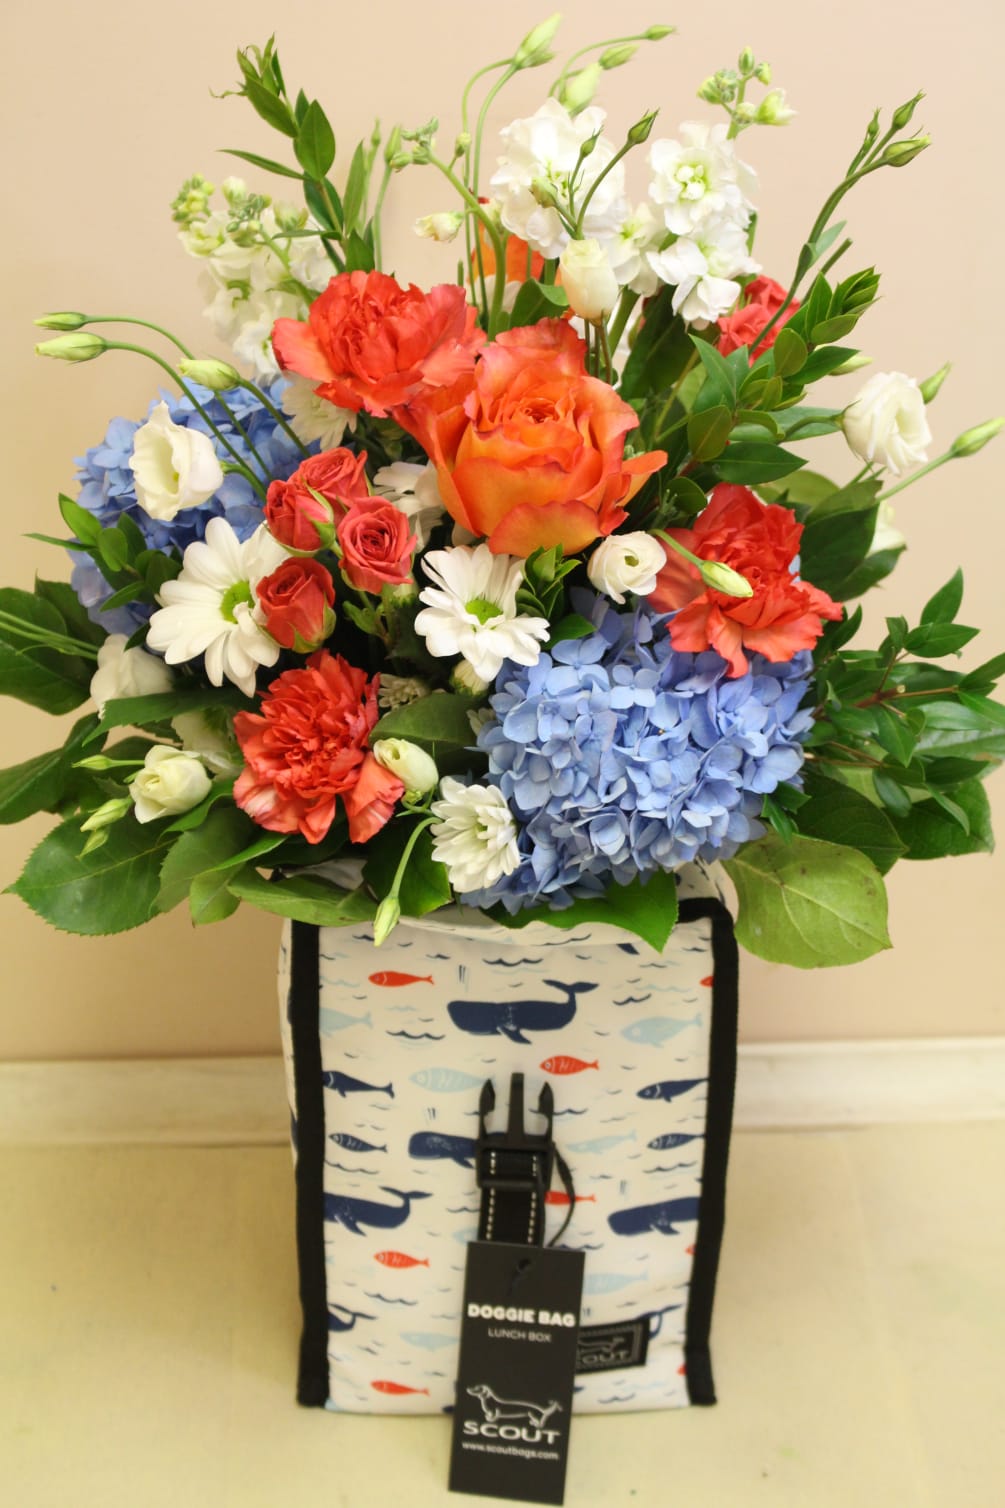 scout&#039;s doggie bag filled with flowers 
great gift!